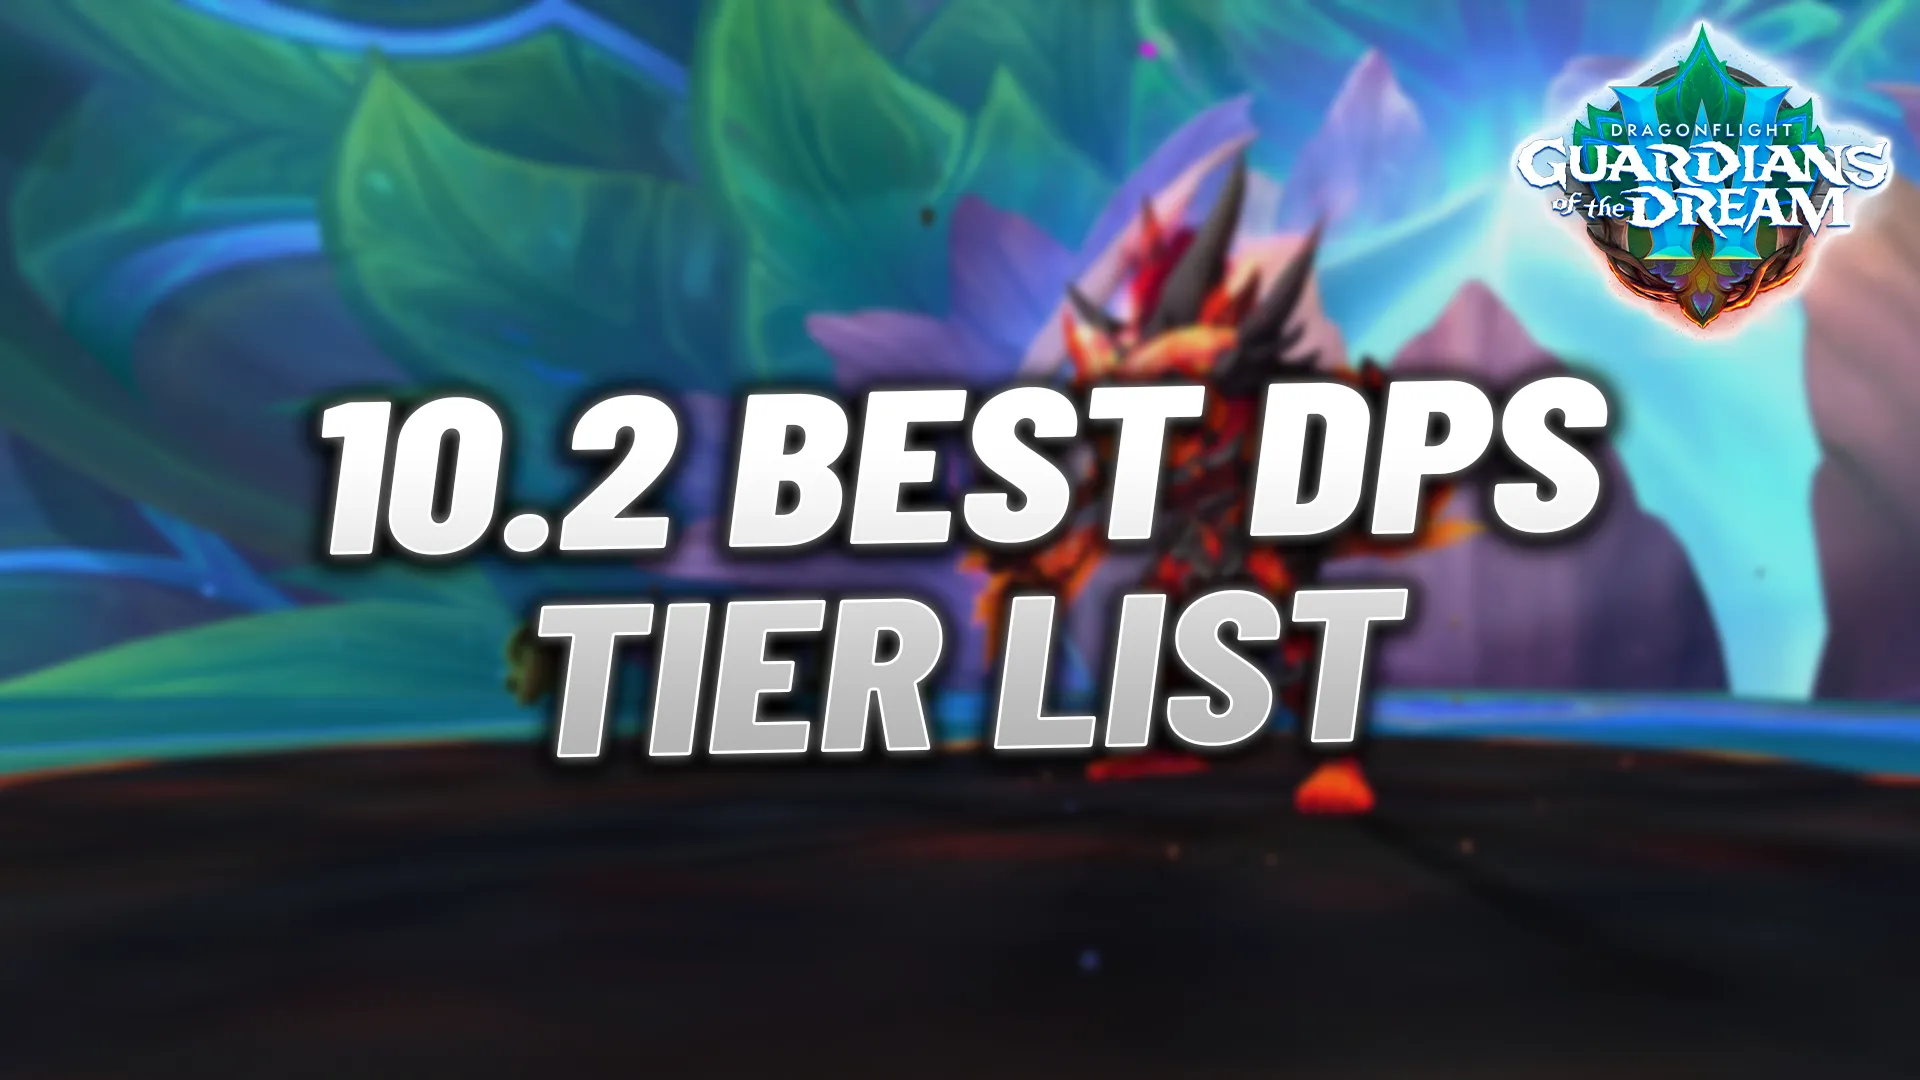 Top M+ Specs in Patch 10.1.5: Best Tier List for High-Level